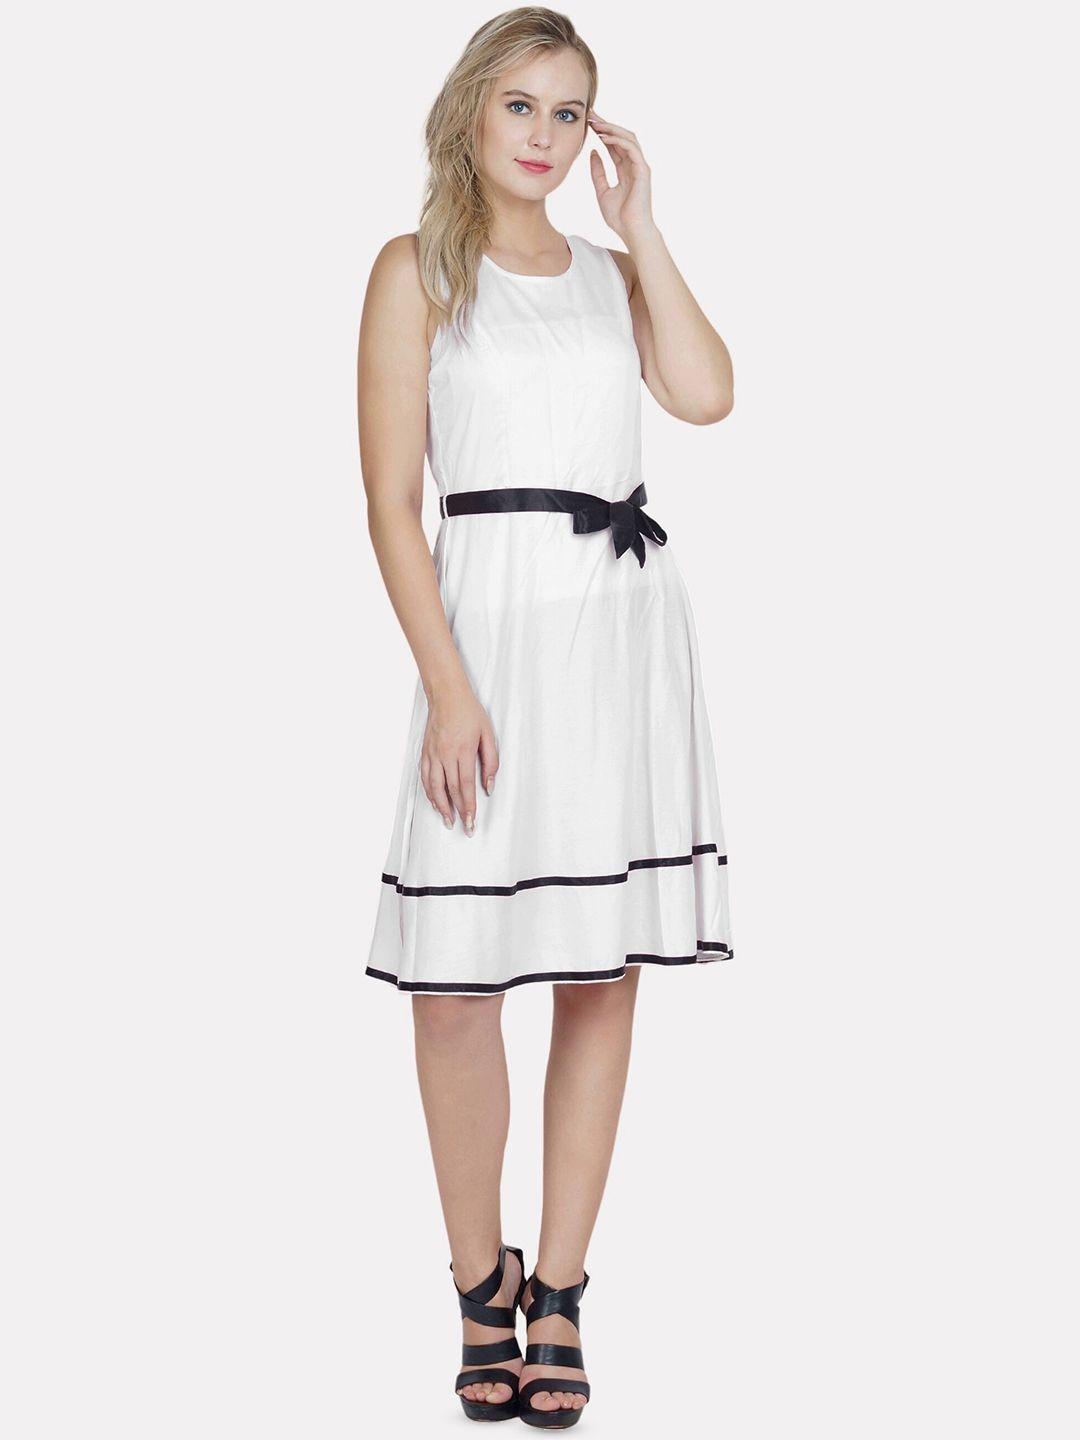 patrorna-round-neck-fit-and-flare-belted-dress